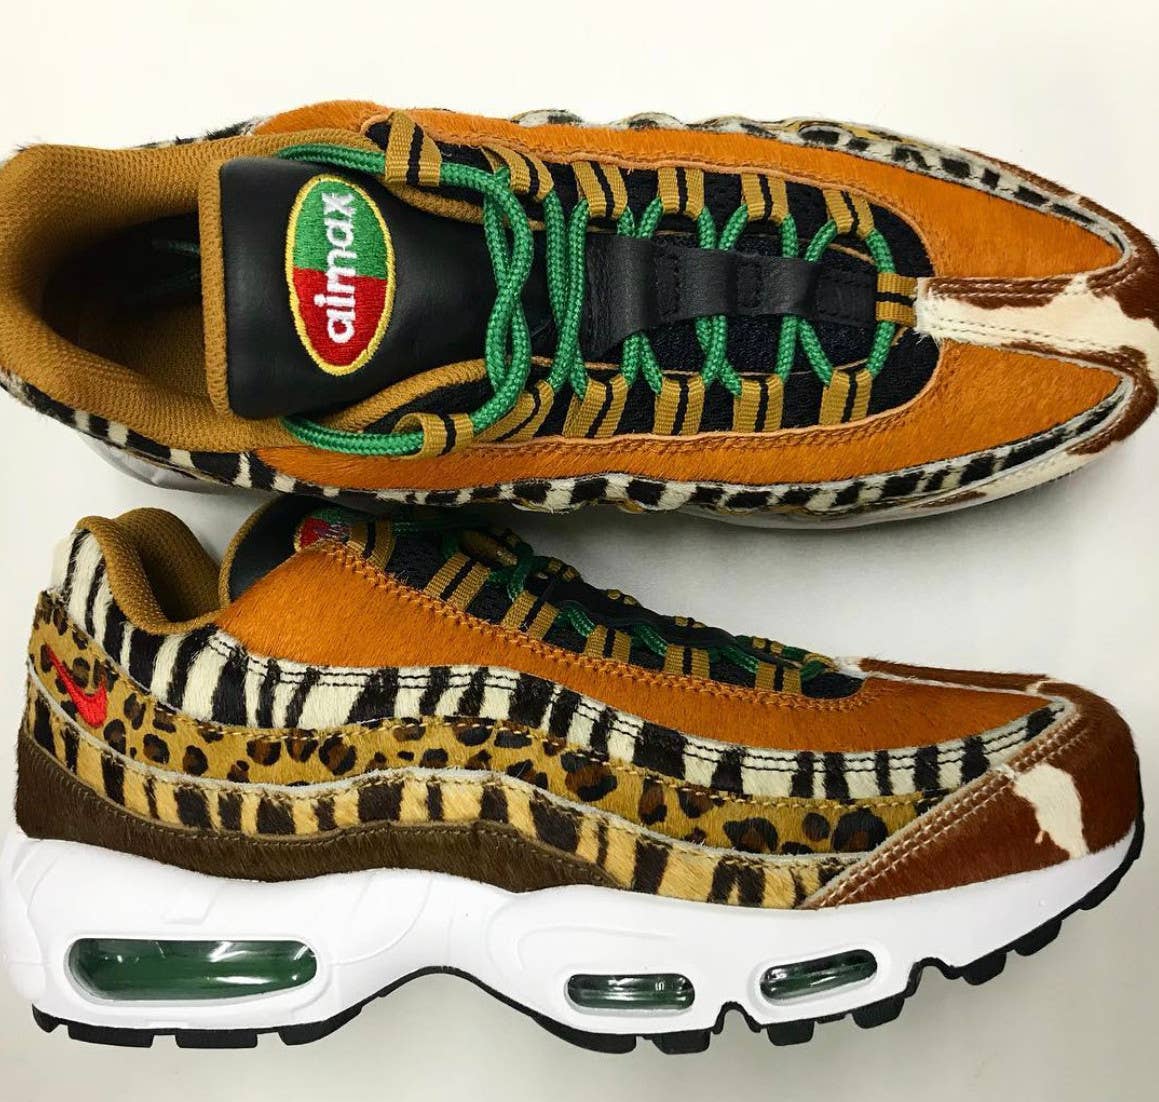 Op en neer gaan ik heb nodig Toestand There's a Friends and Family 'Animal' Atmos x Air Max 95 | Complex